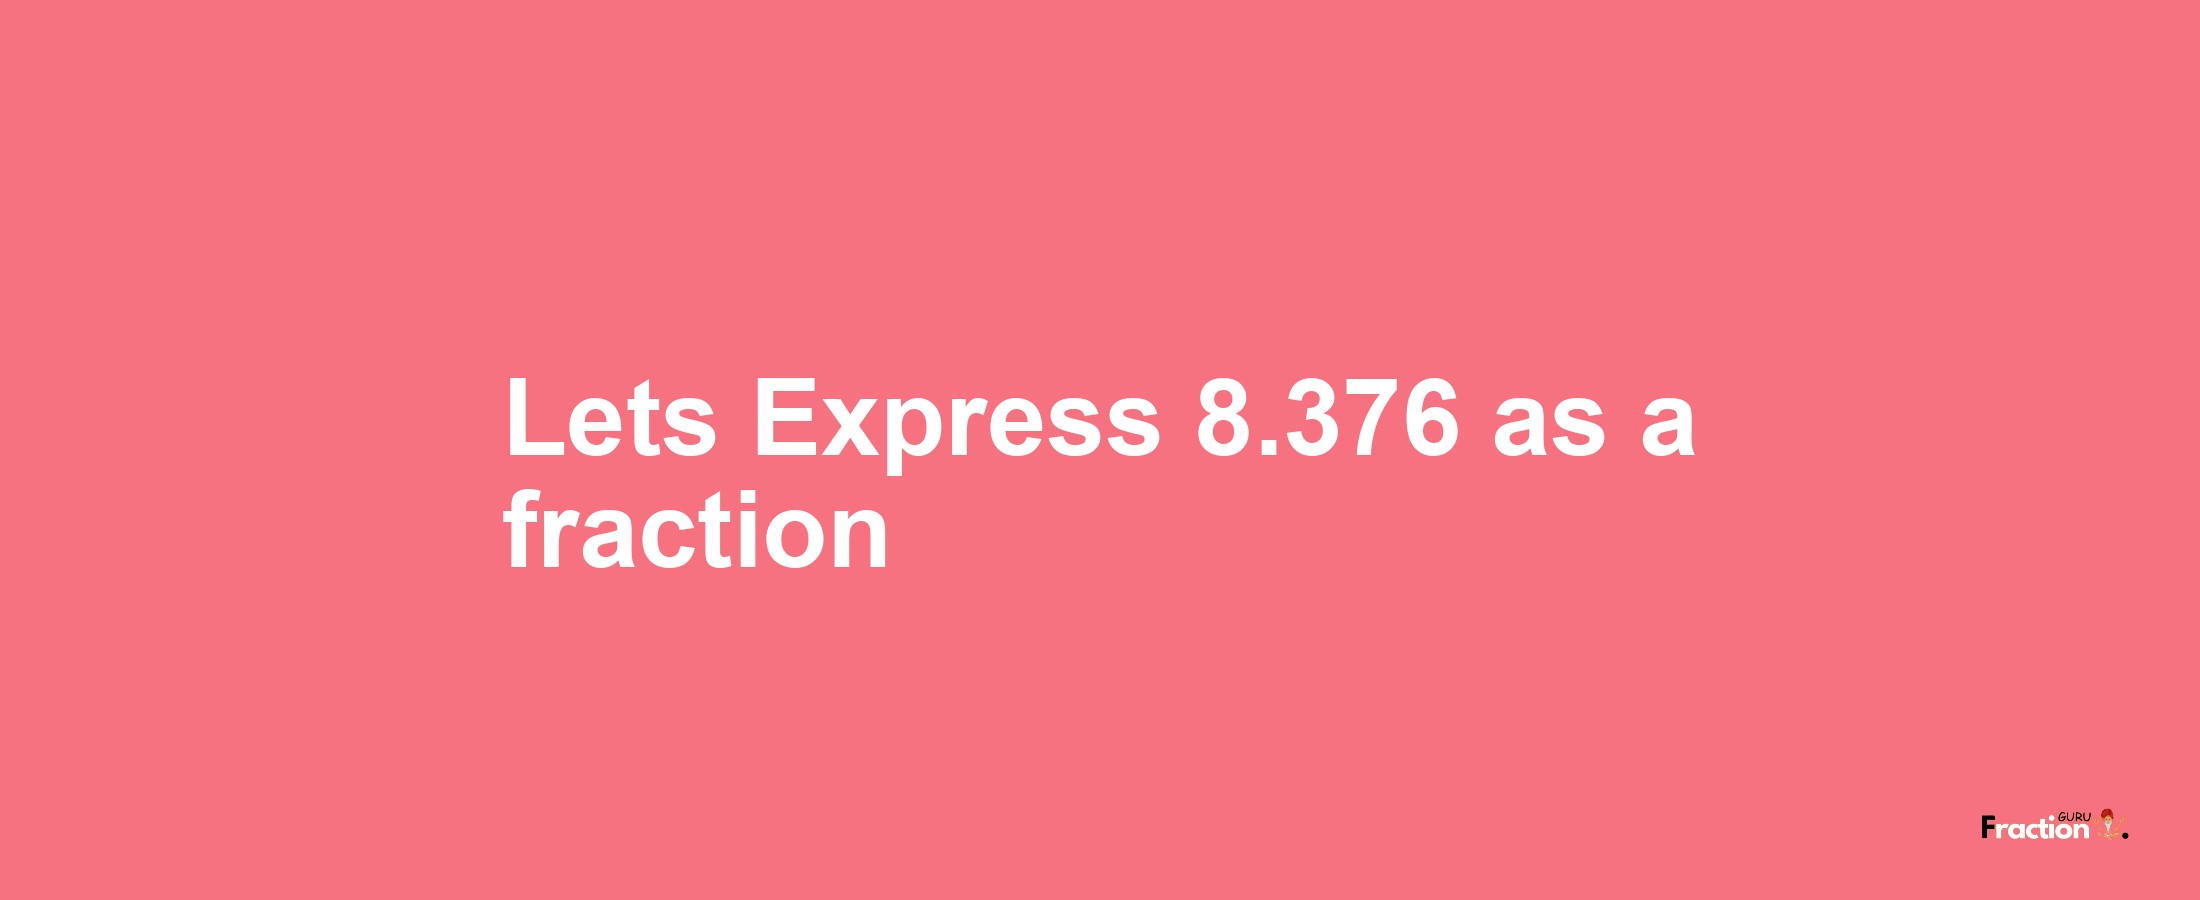 Lets Express 8.376 as afraction